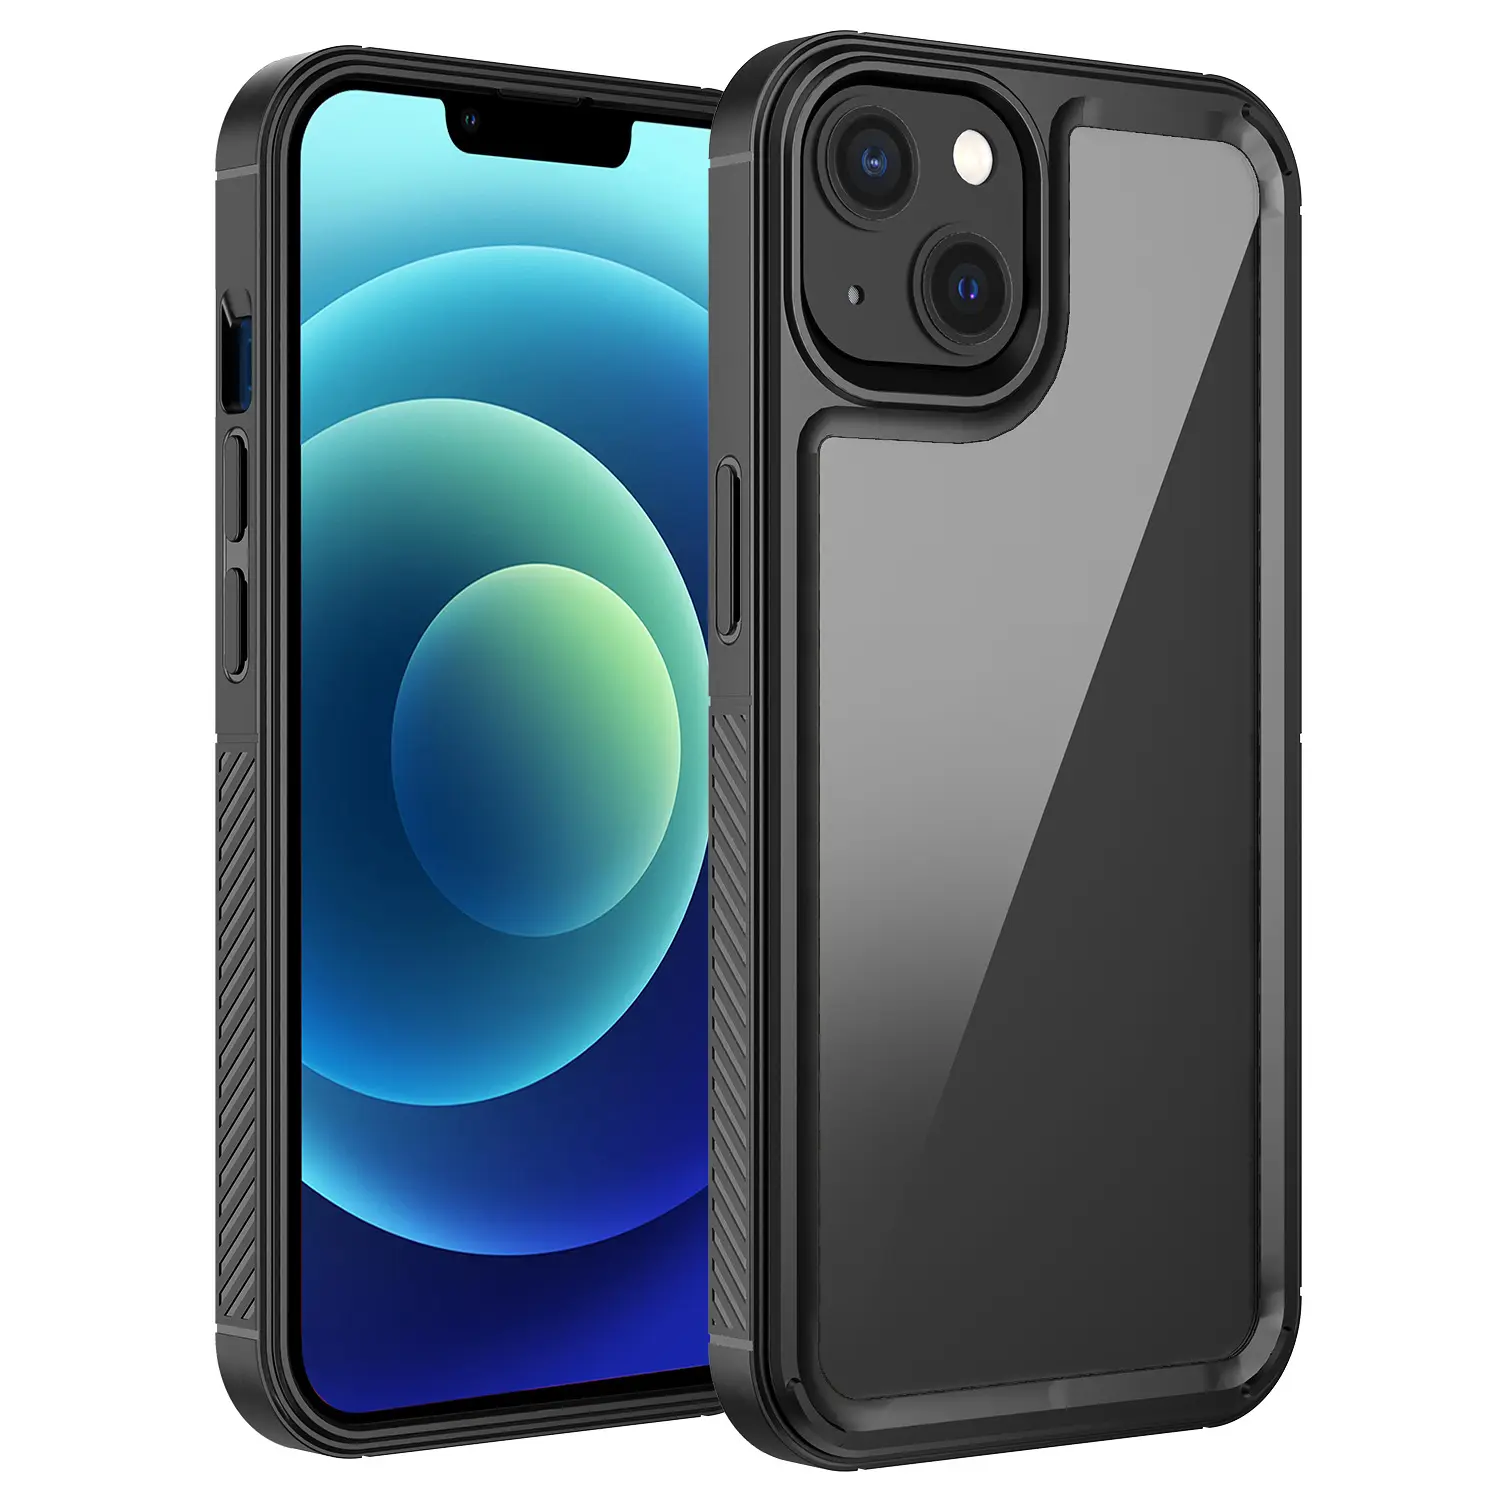 New design simpliticy wireless charging phone case for Apple iphone 11 12 13 14 plus/pro/pro max